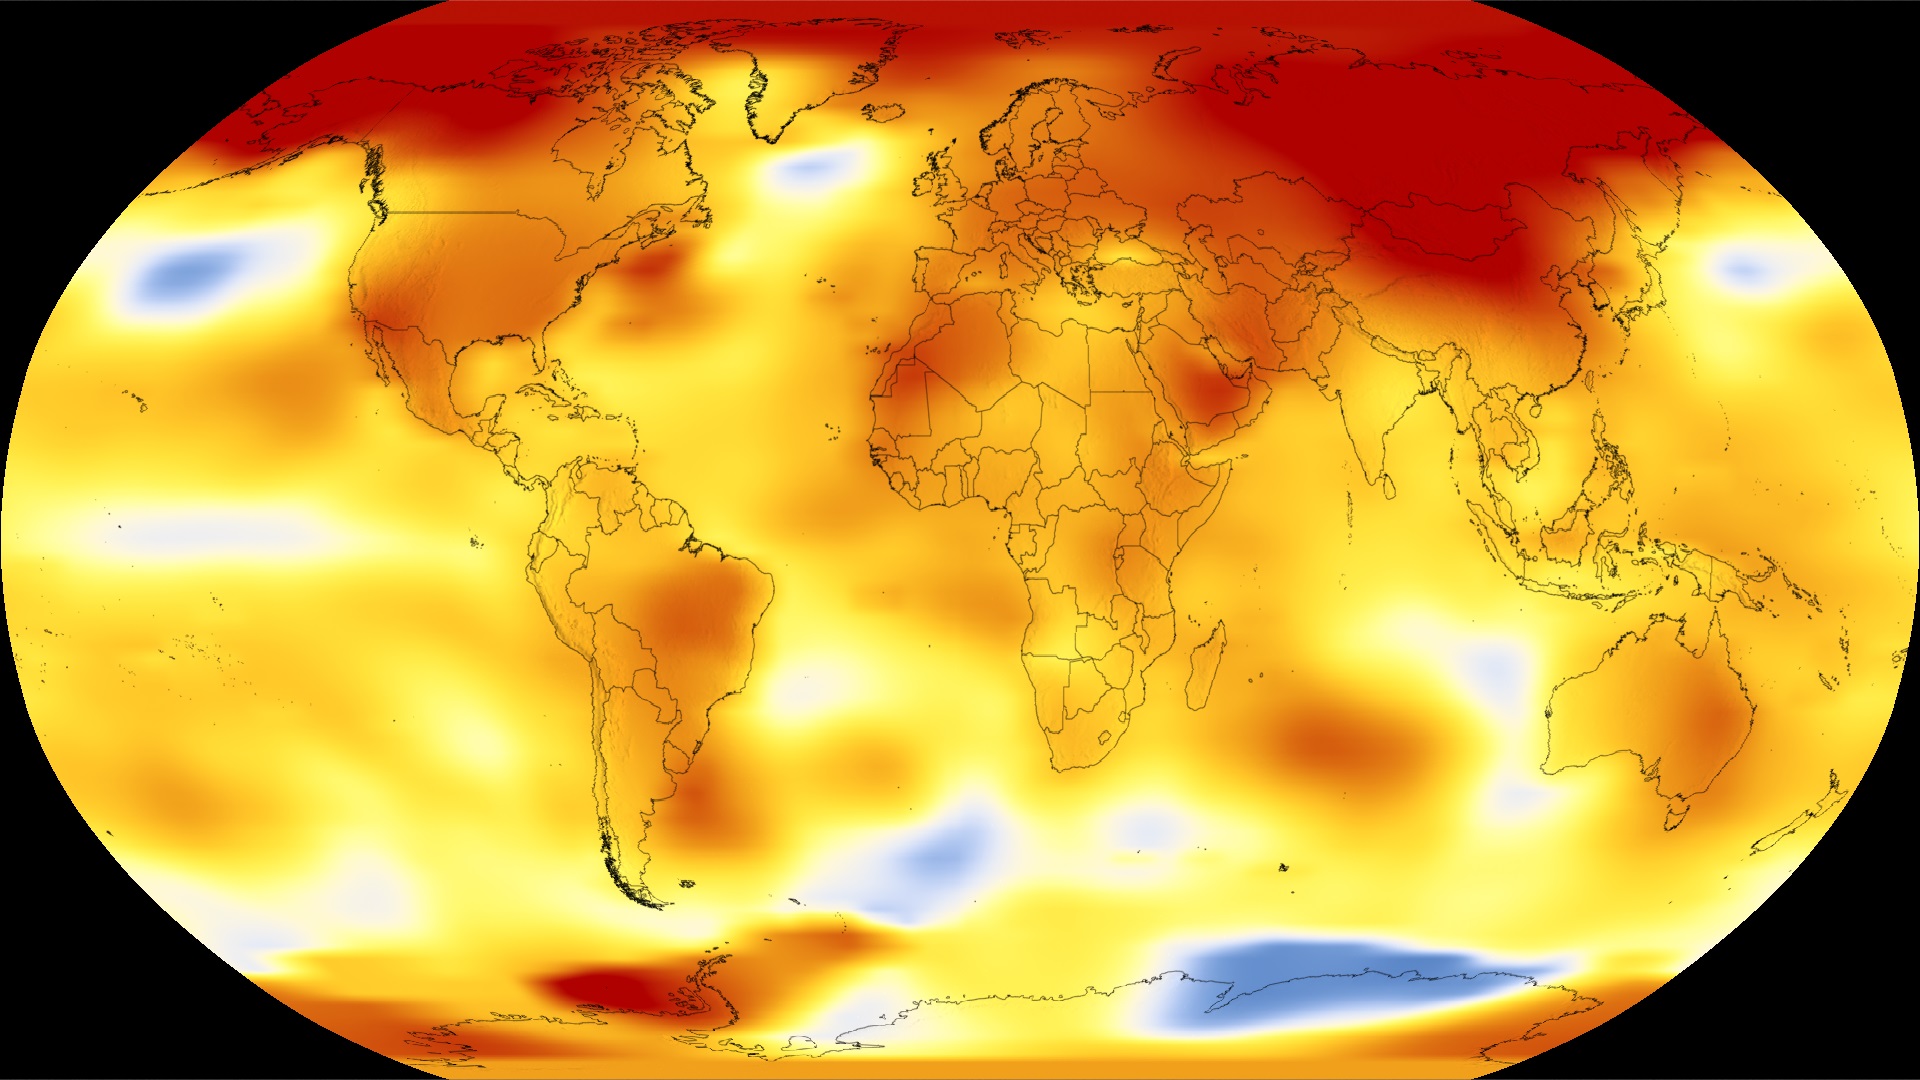 Shown here are 2017 global temperature data: higher than normal temperatures are shown in red, lower than normal temps in blue